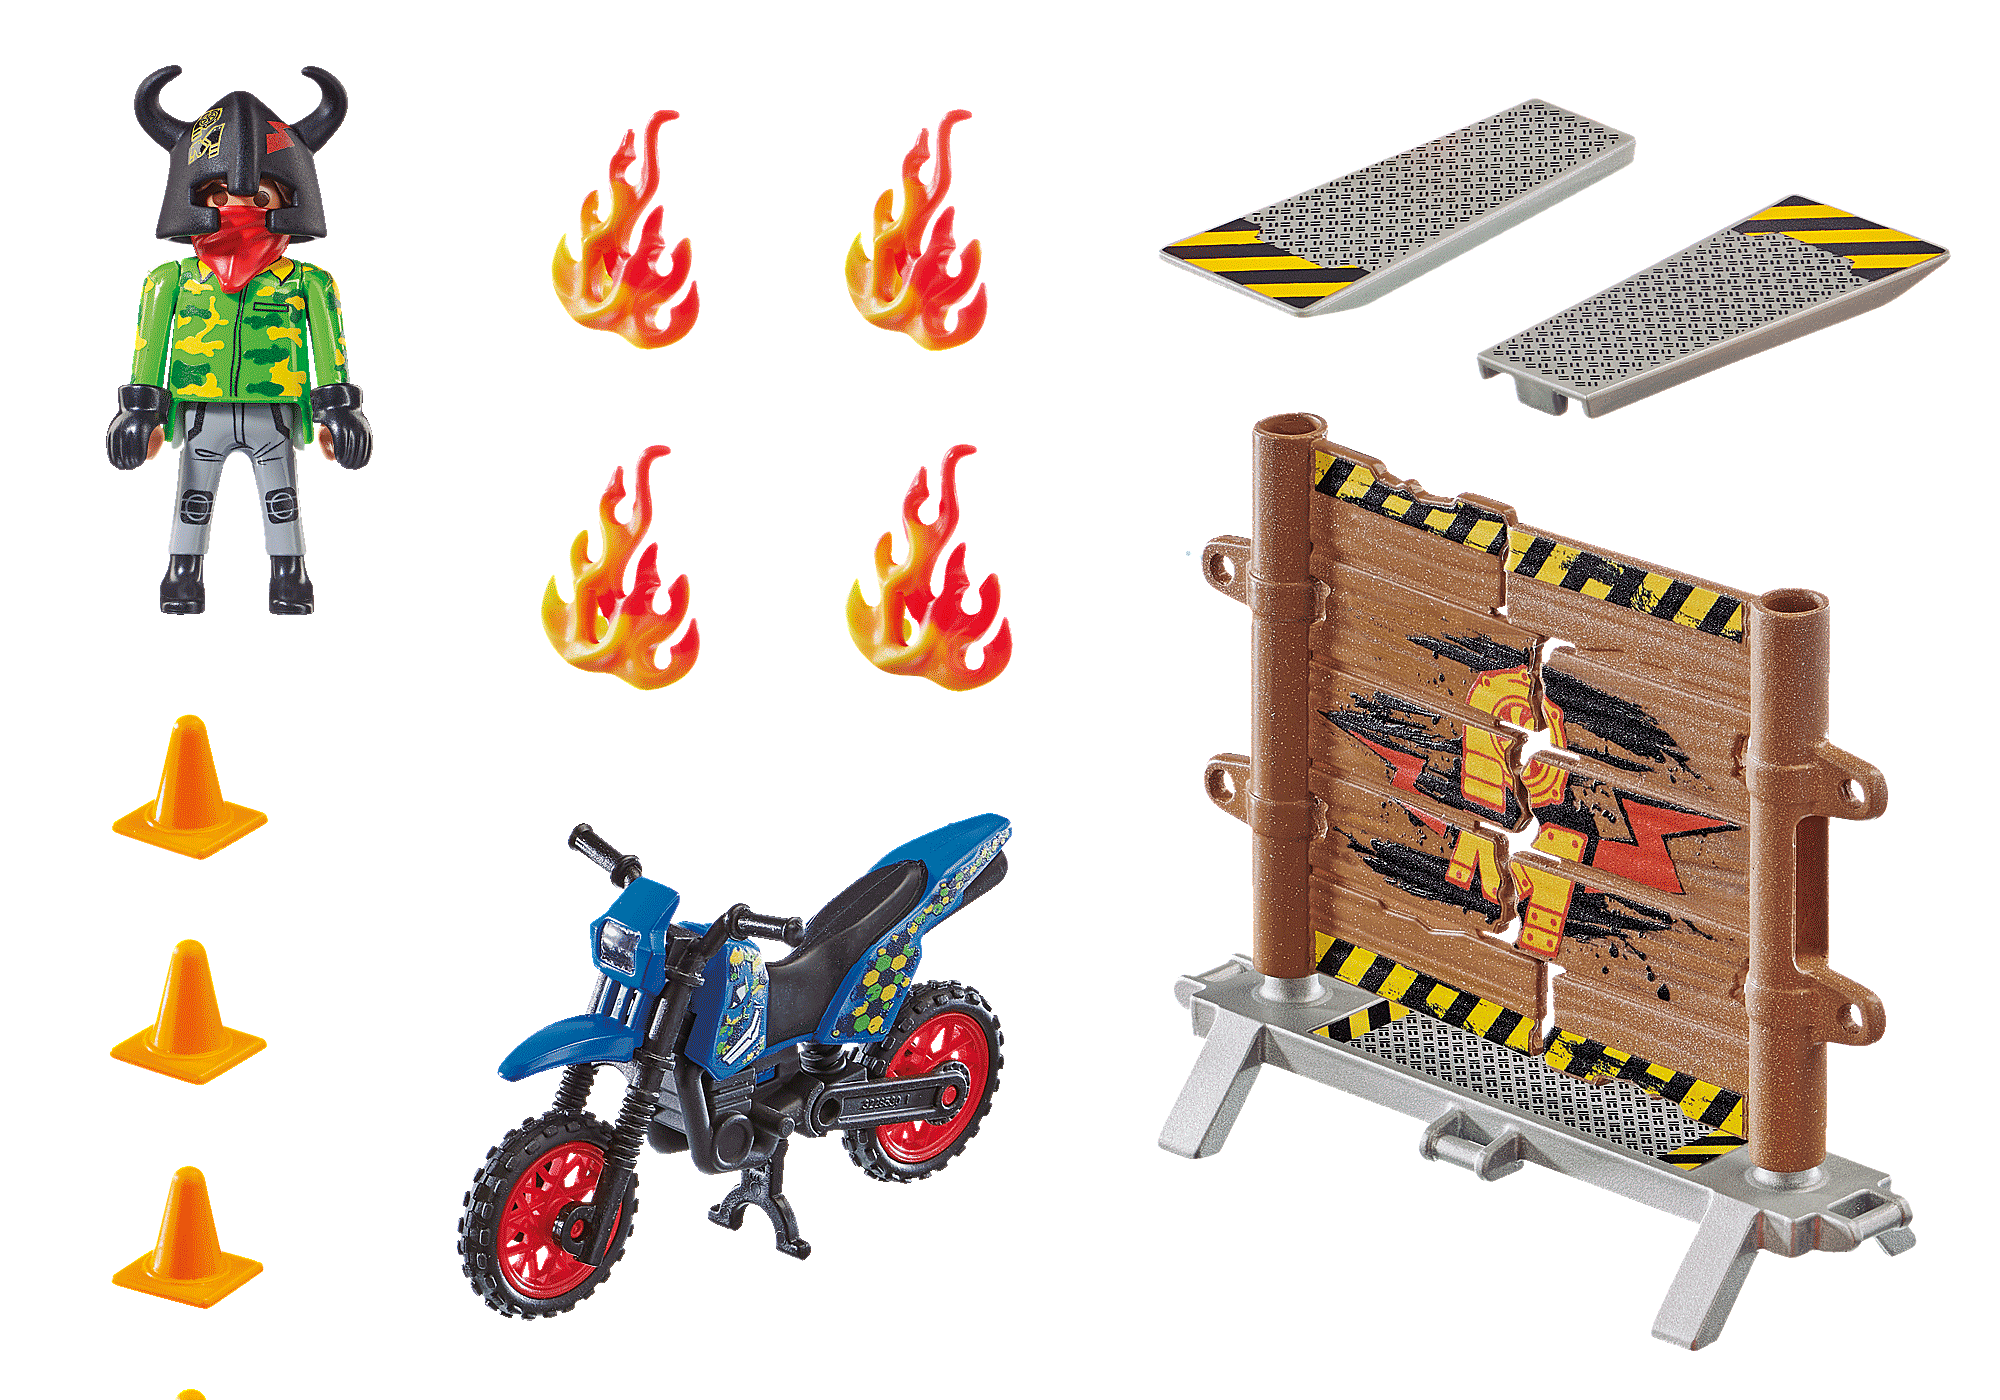 Stunt Show Motocross with Fiery Wall - 70553